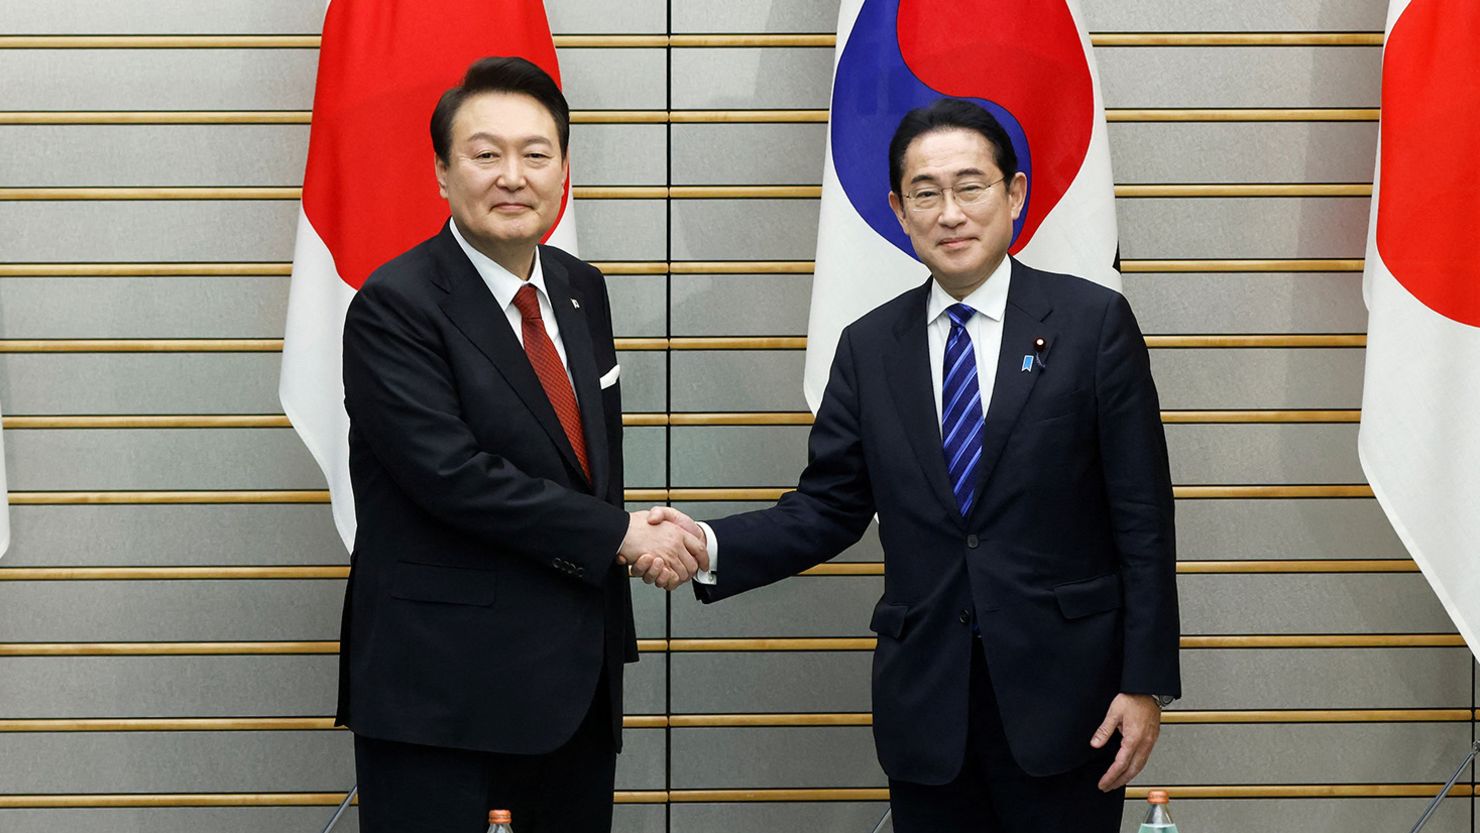 South Korea's President Yoon Suk Yeol shakes hands with Japan's Prime Minister Fumio Kishida, as the meet at the prime minister's official residence in Tokyo, Japan, March 16, 2023. Kiyoshi Ota/Pool via REUTERS